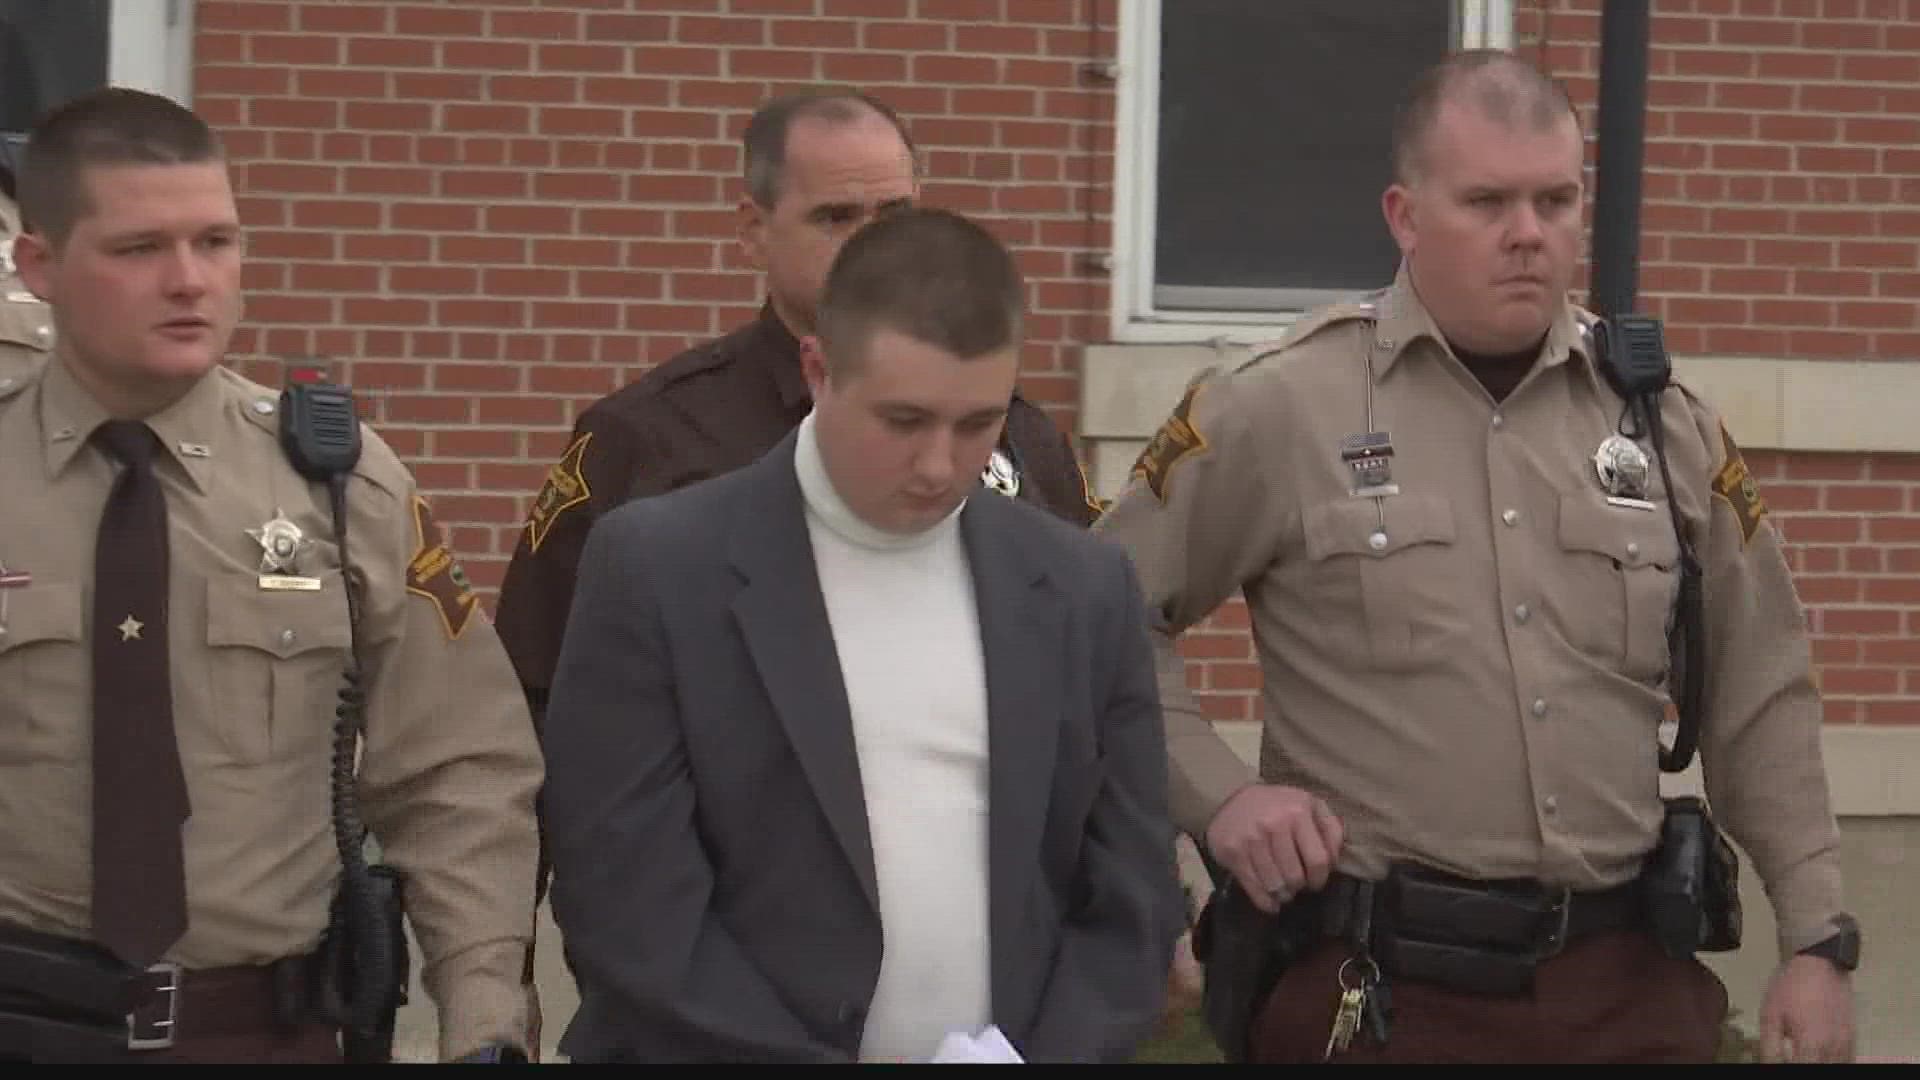 Blake was found guilty of the Morgan County murder.